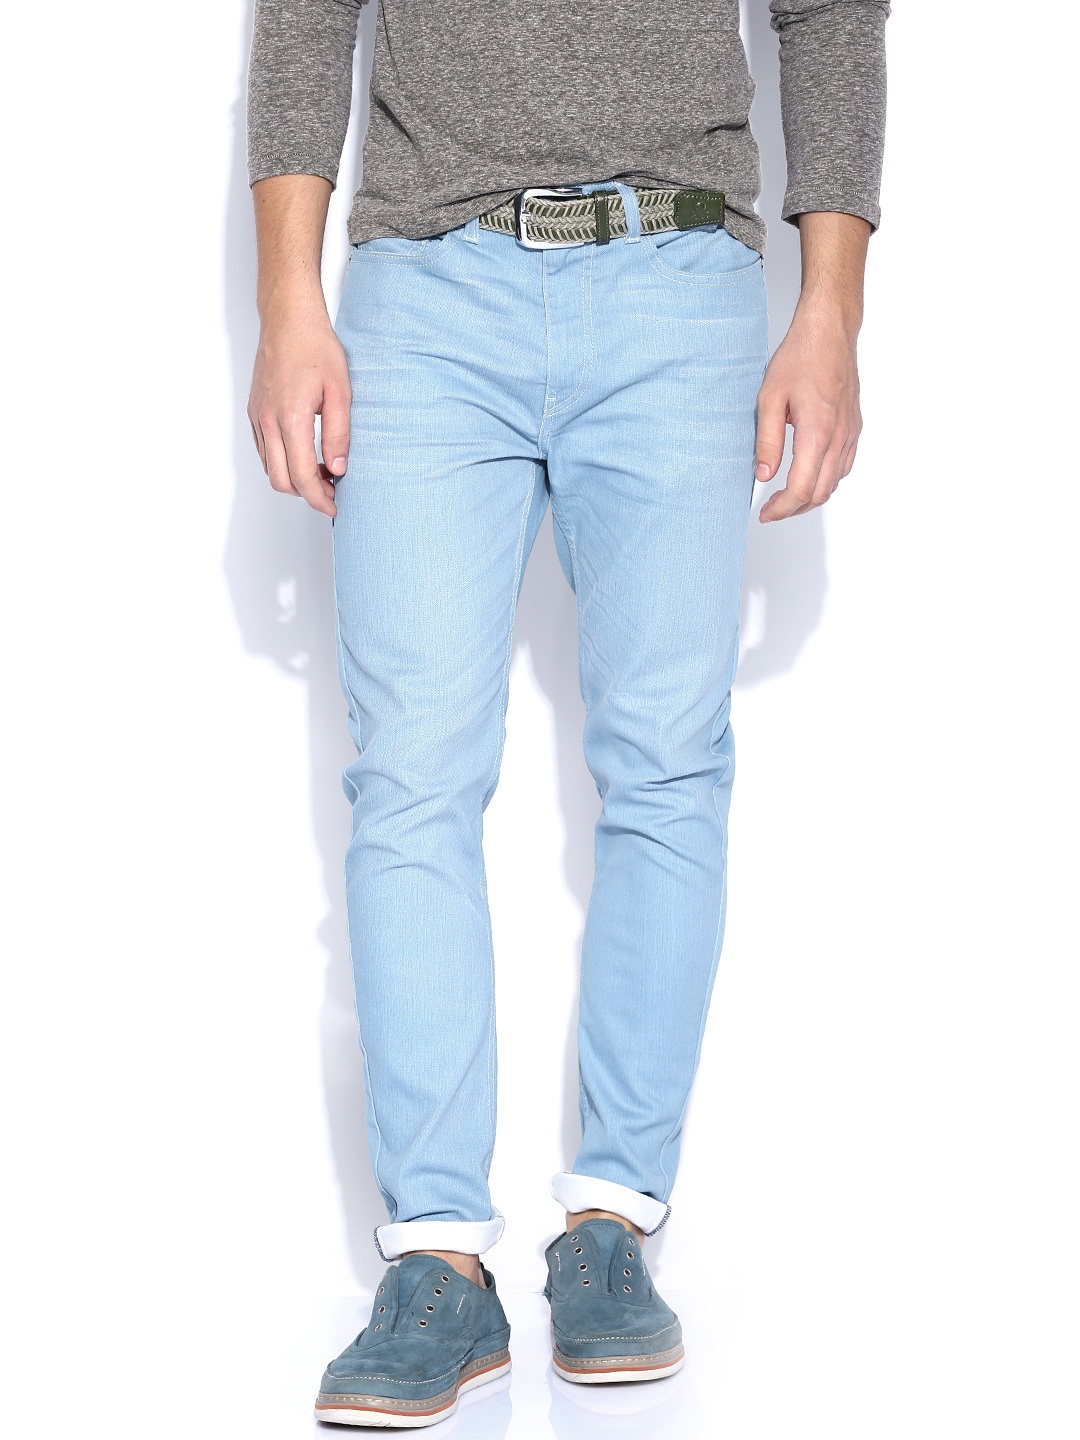 Home Clothing Men Clothing Jeans United Colors of Benetton Jeans